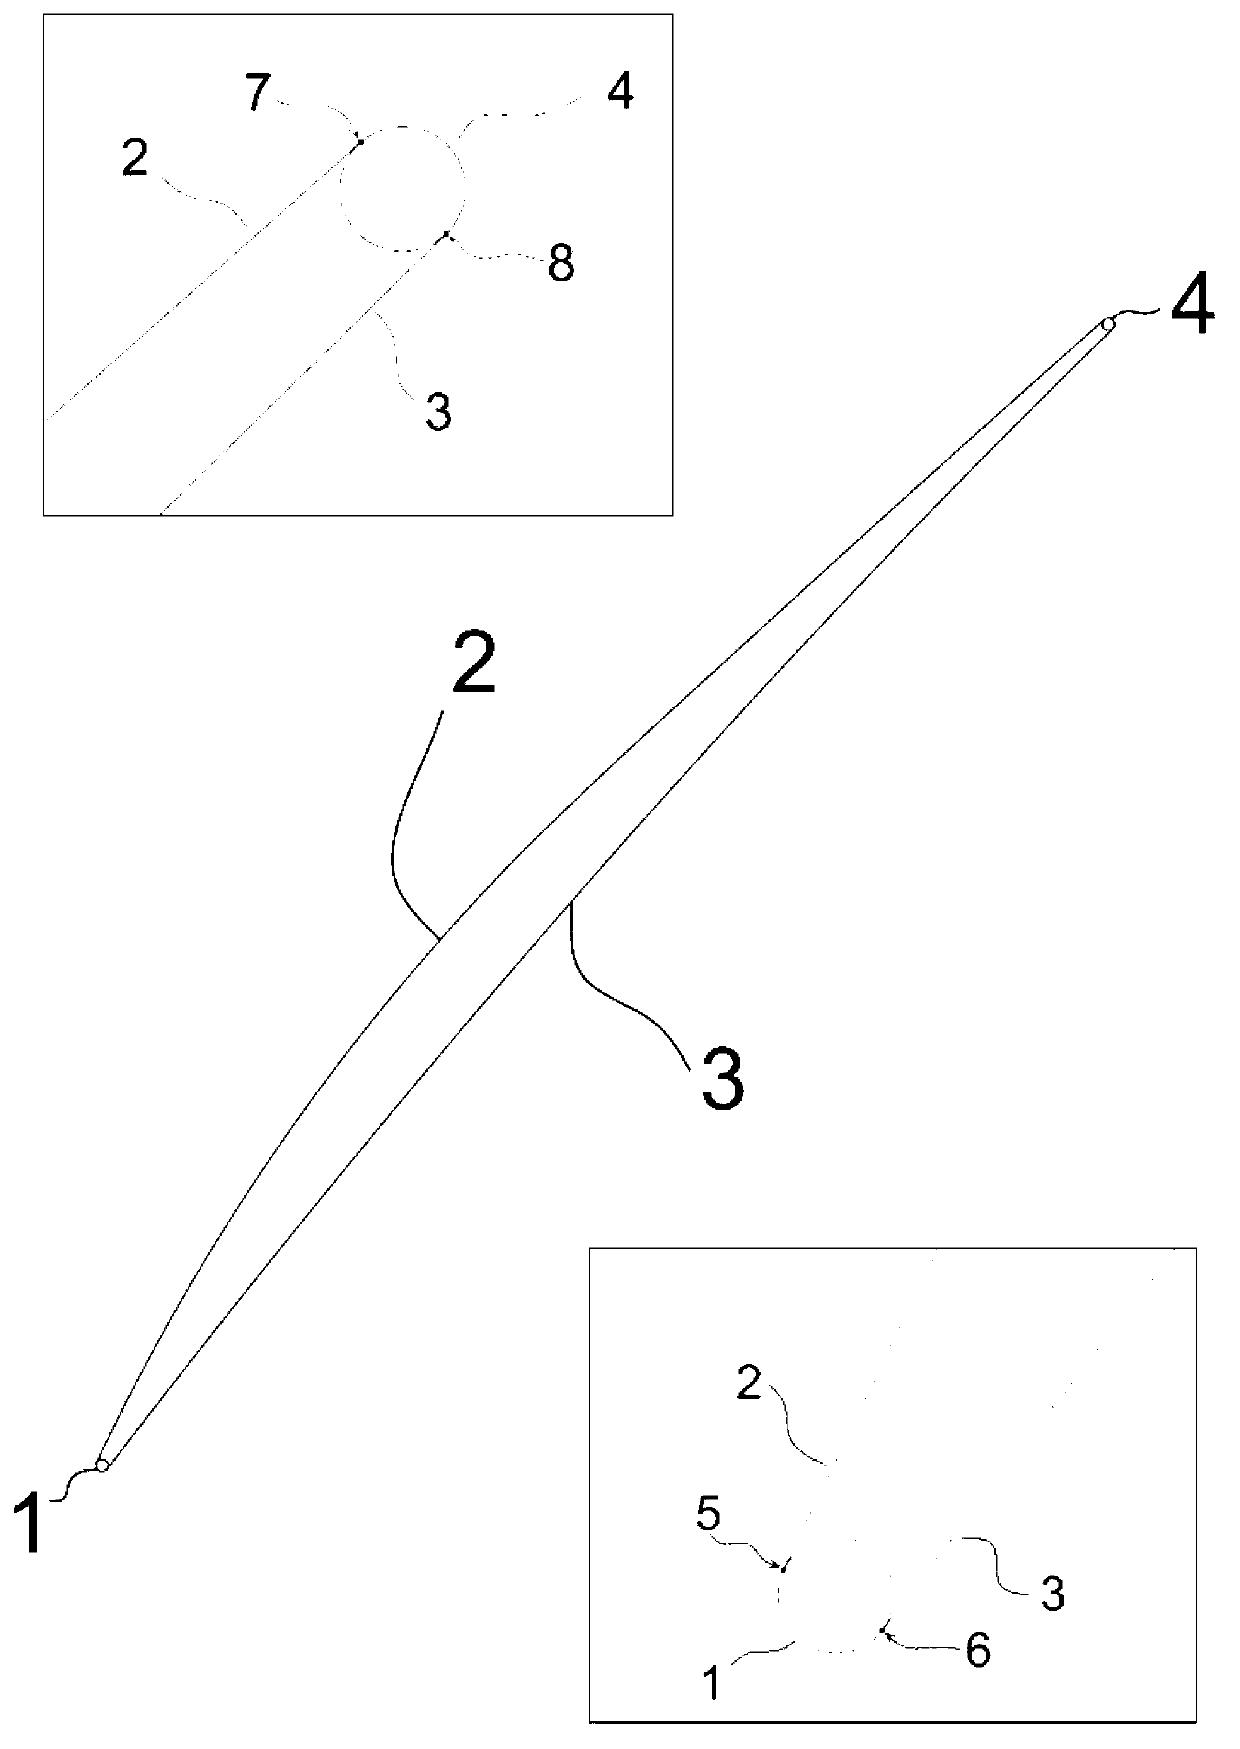 CAD (Computer-Aided Design) aided design method of controllable diffused blade profile with curvature continuity